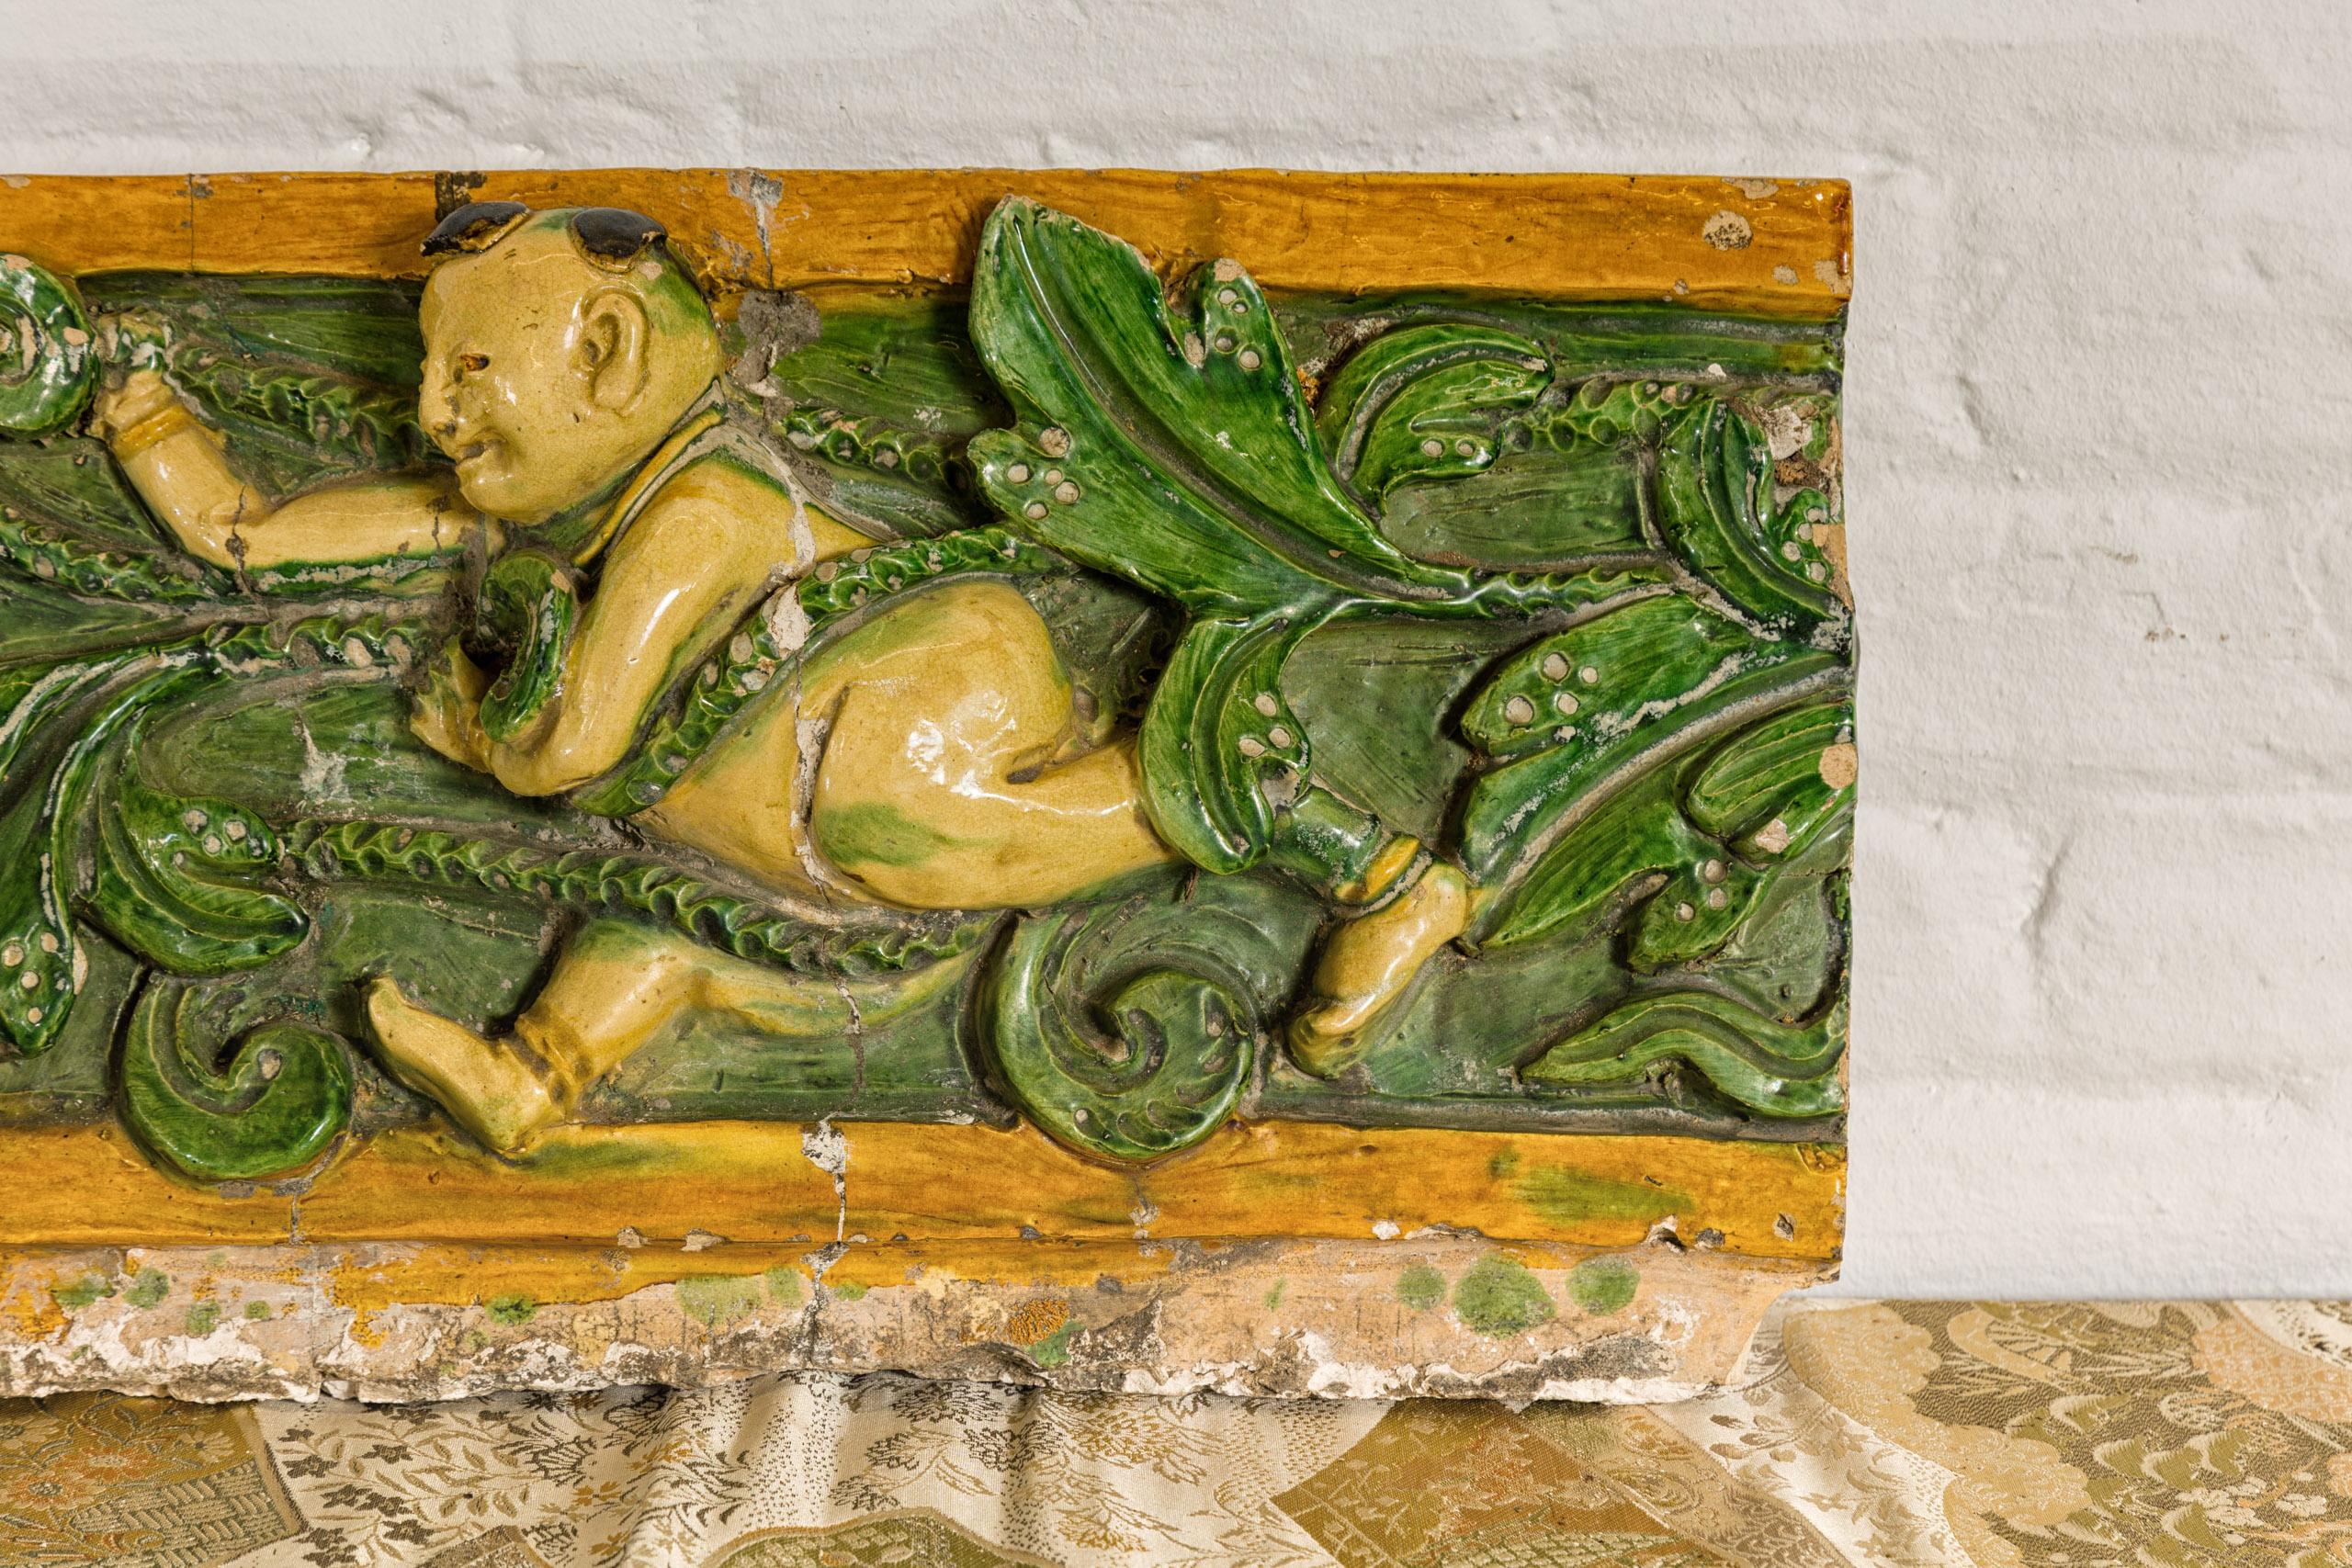 Glazed Qing Dynasty Tricolor Roof Fragment from a Temple Depicting a Boy Amidst Leaves For Sale